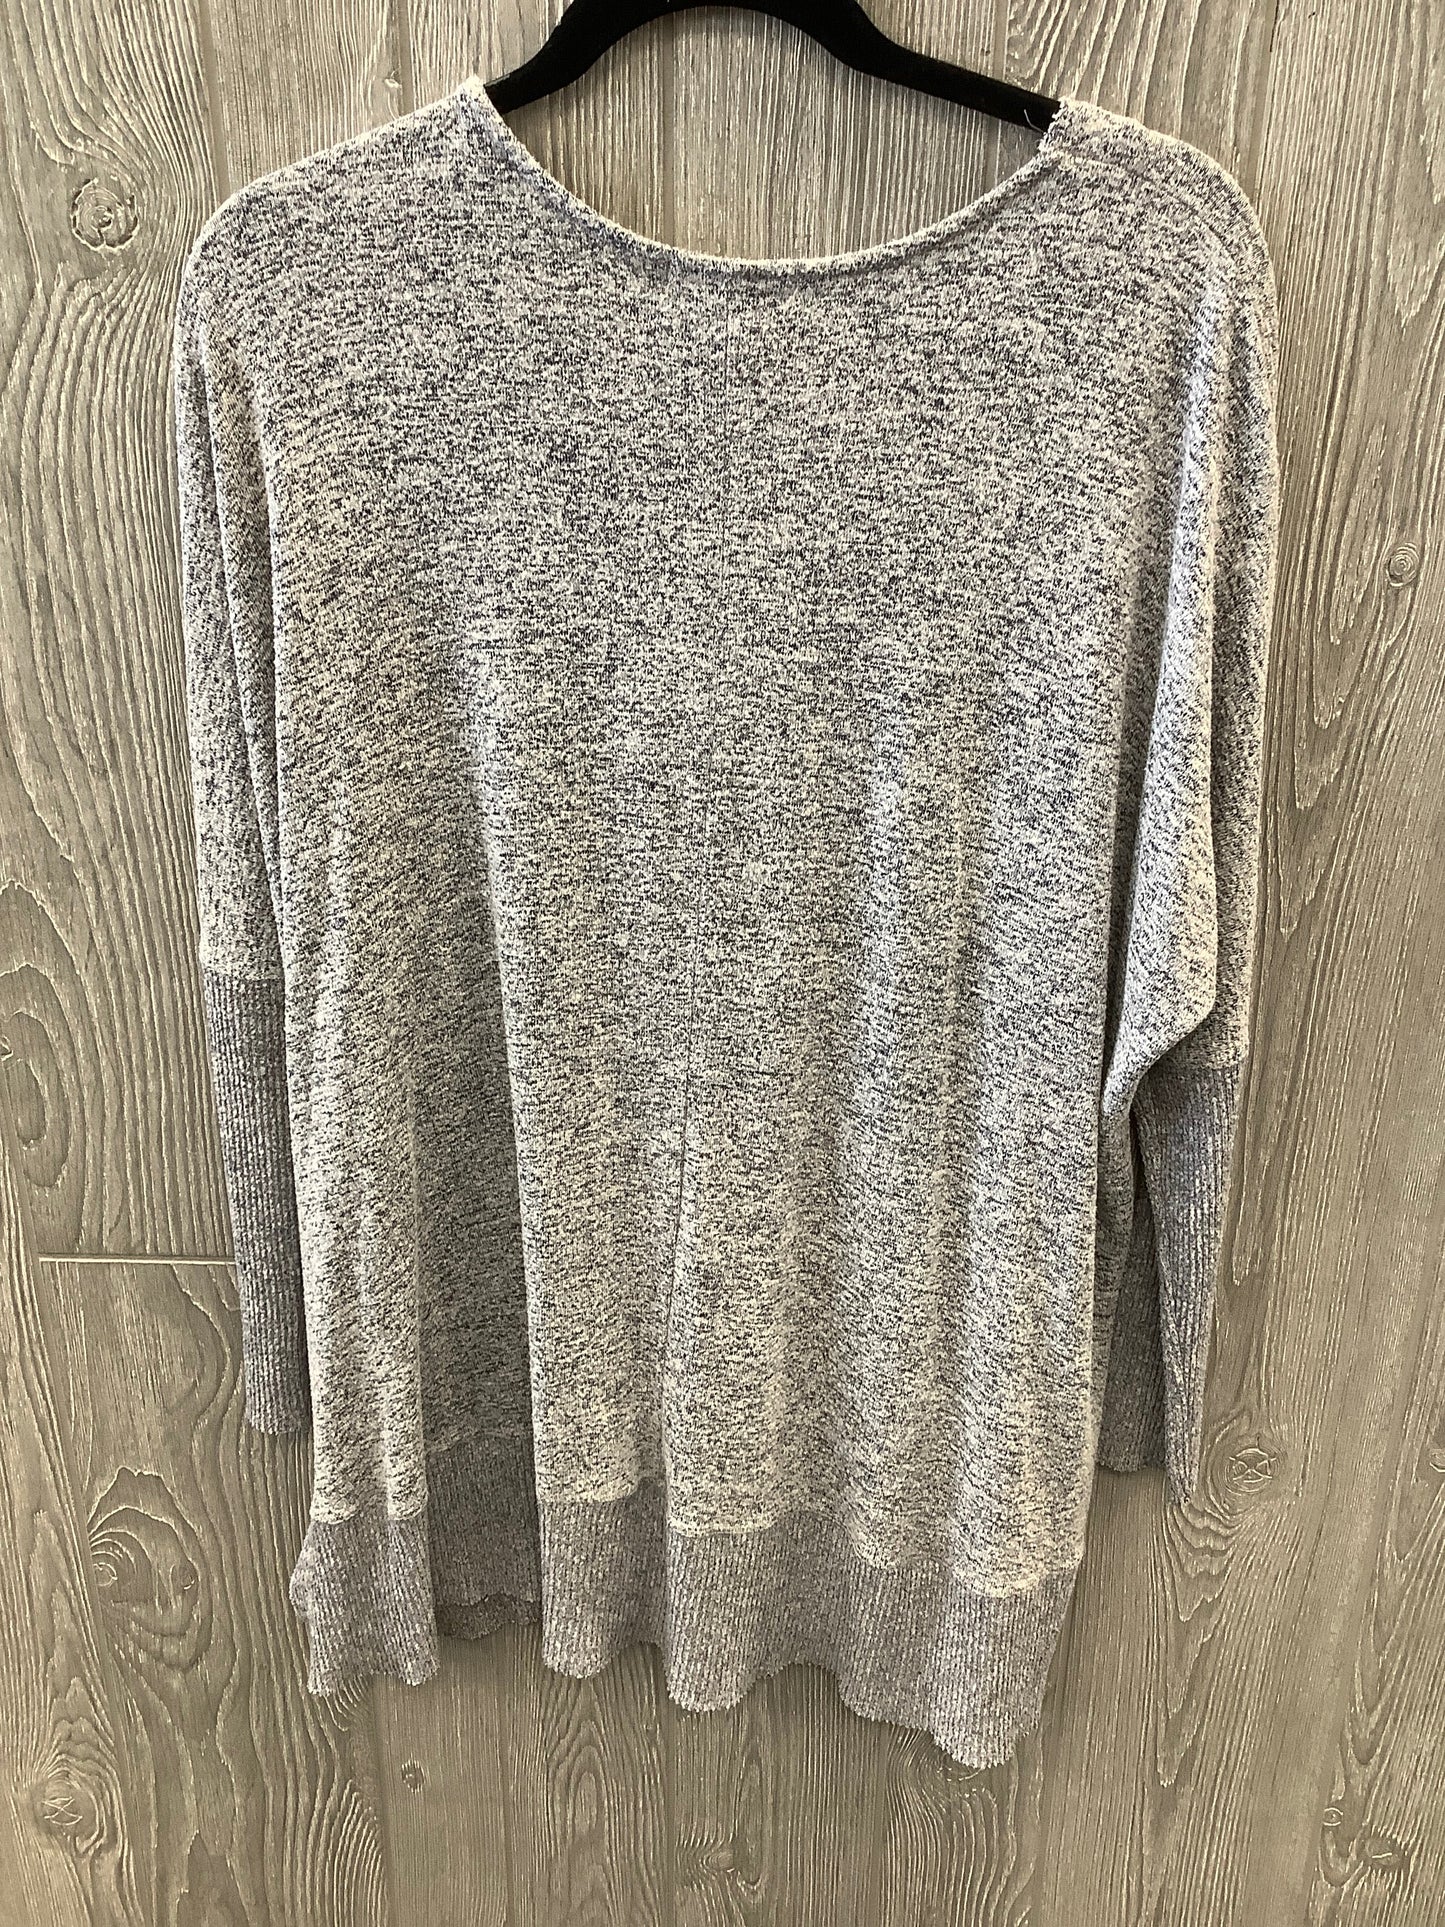 Blue Top Long Sleeve Clothes Mentor, Size M